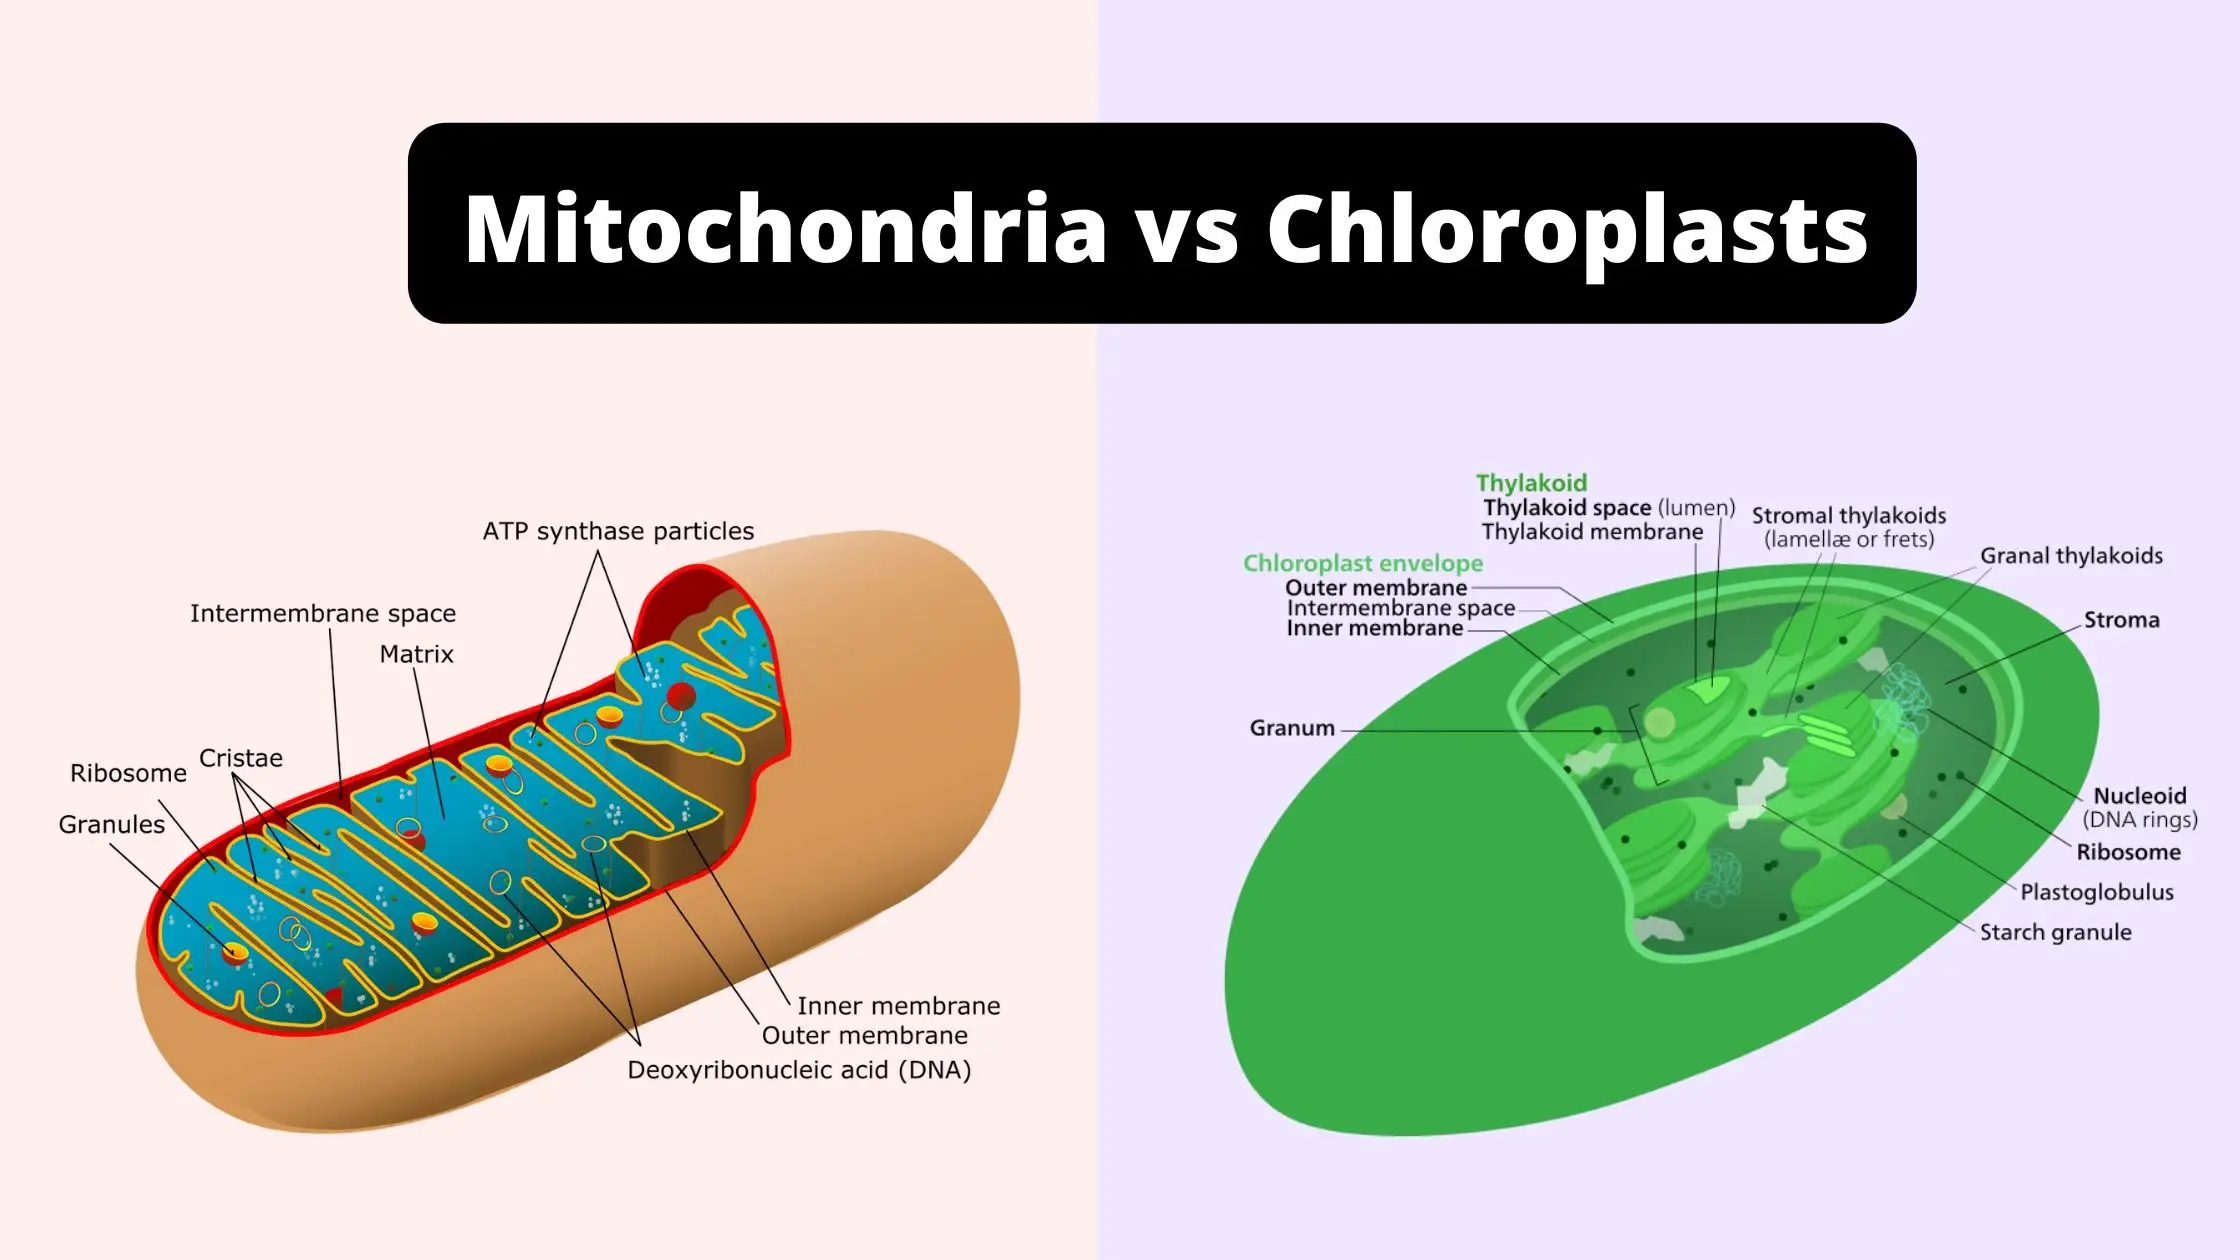 Presence in chloroplasts and mitochondria